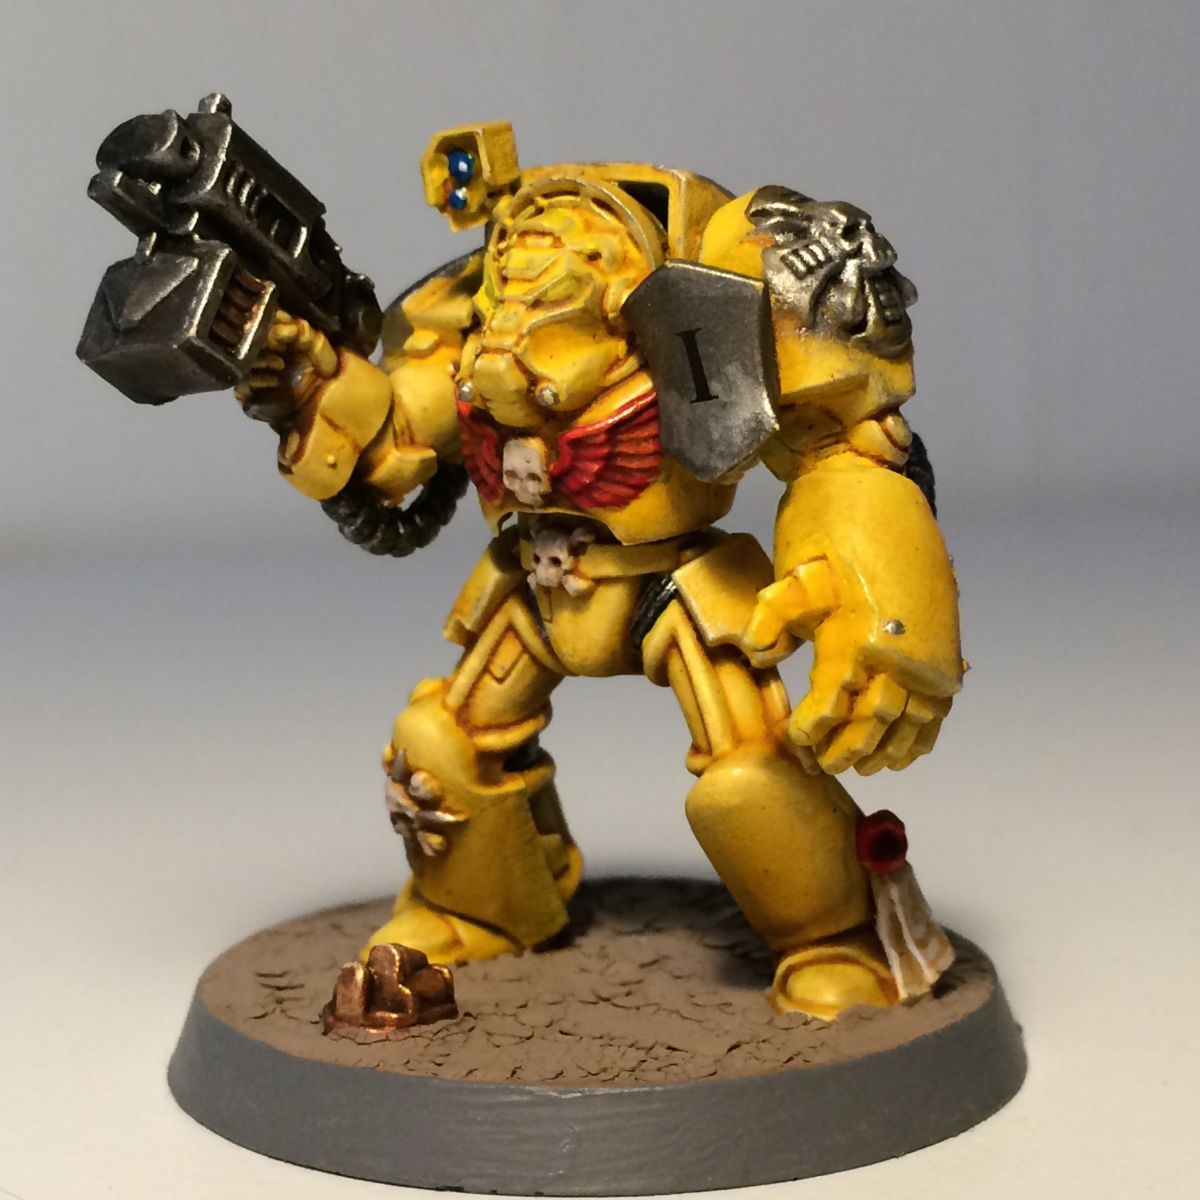 Imperial fists